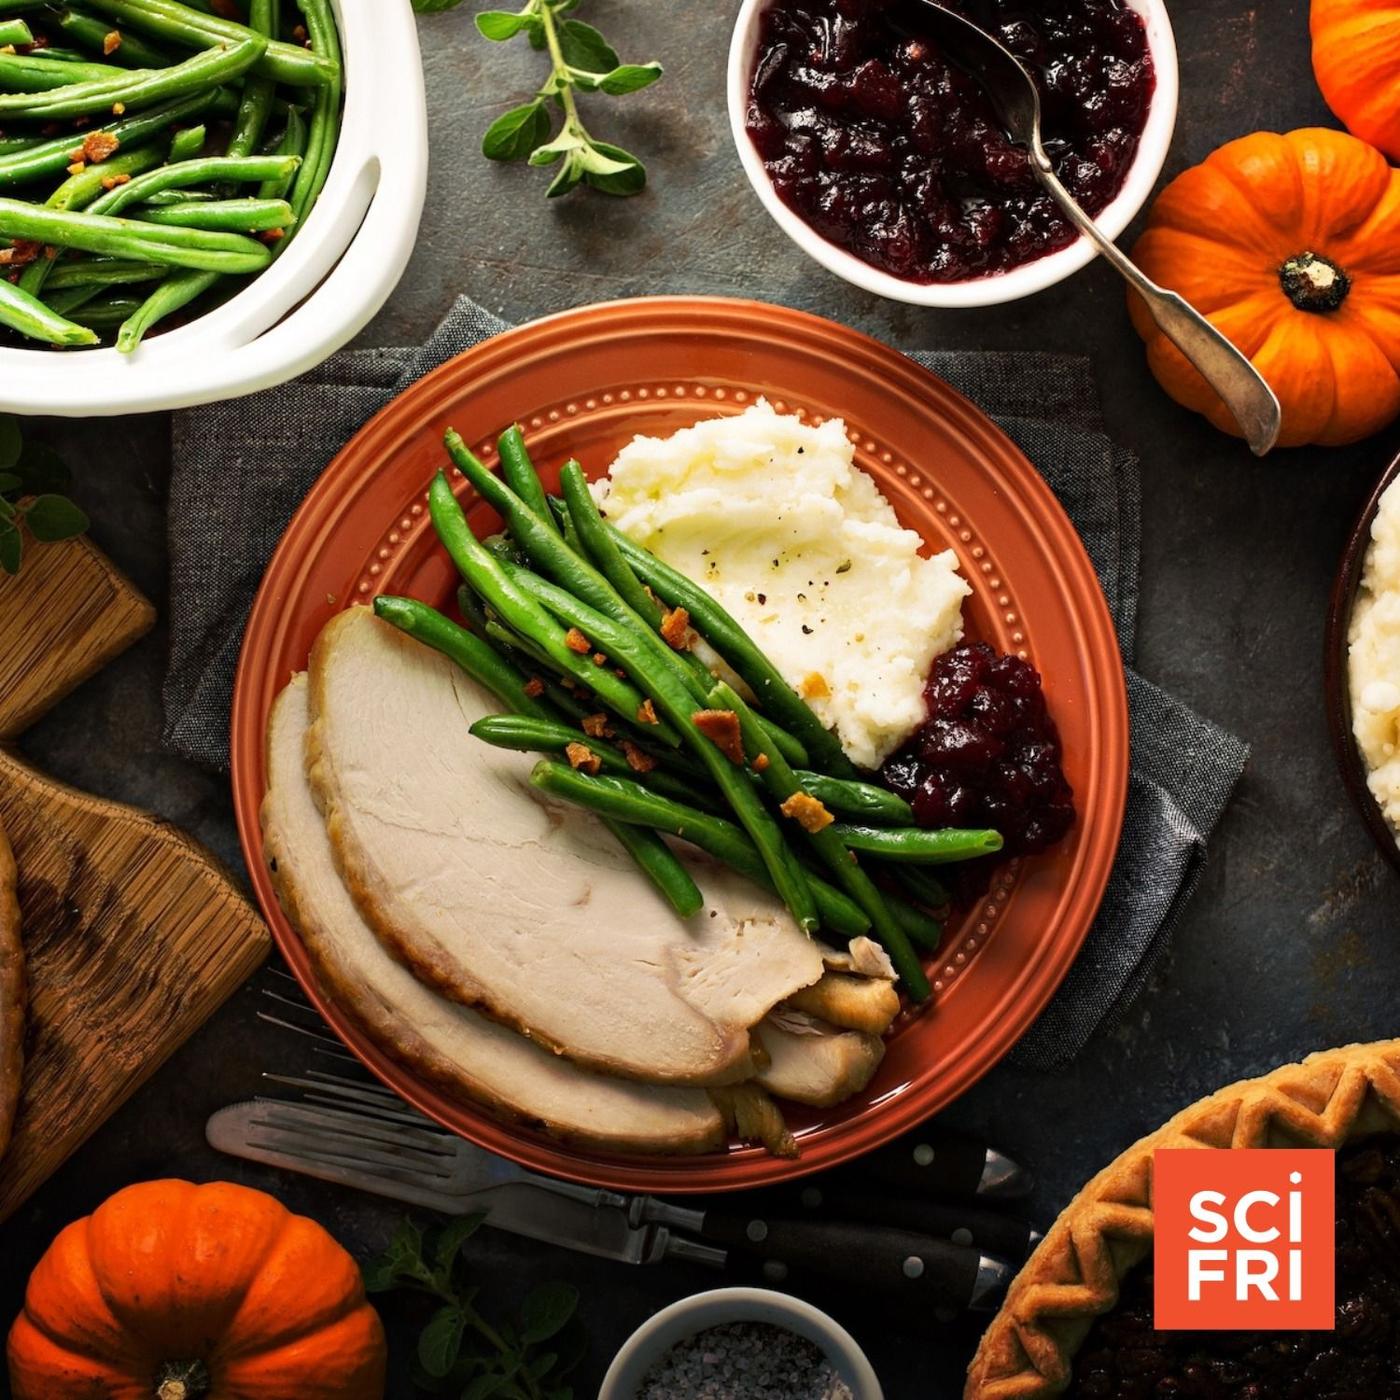 Ask A Chef: How Can I Use Science To Make Thanksgiving Tastier?